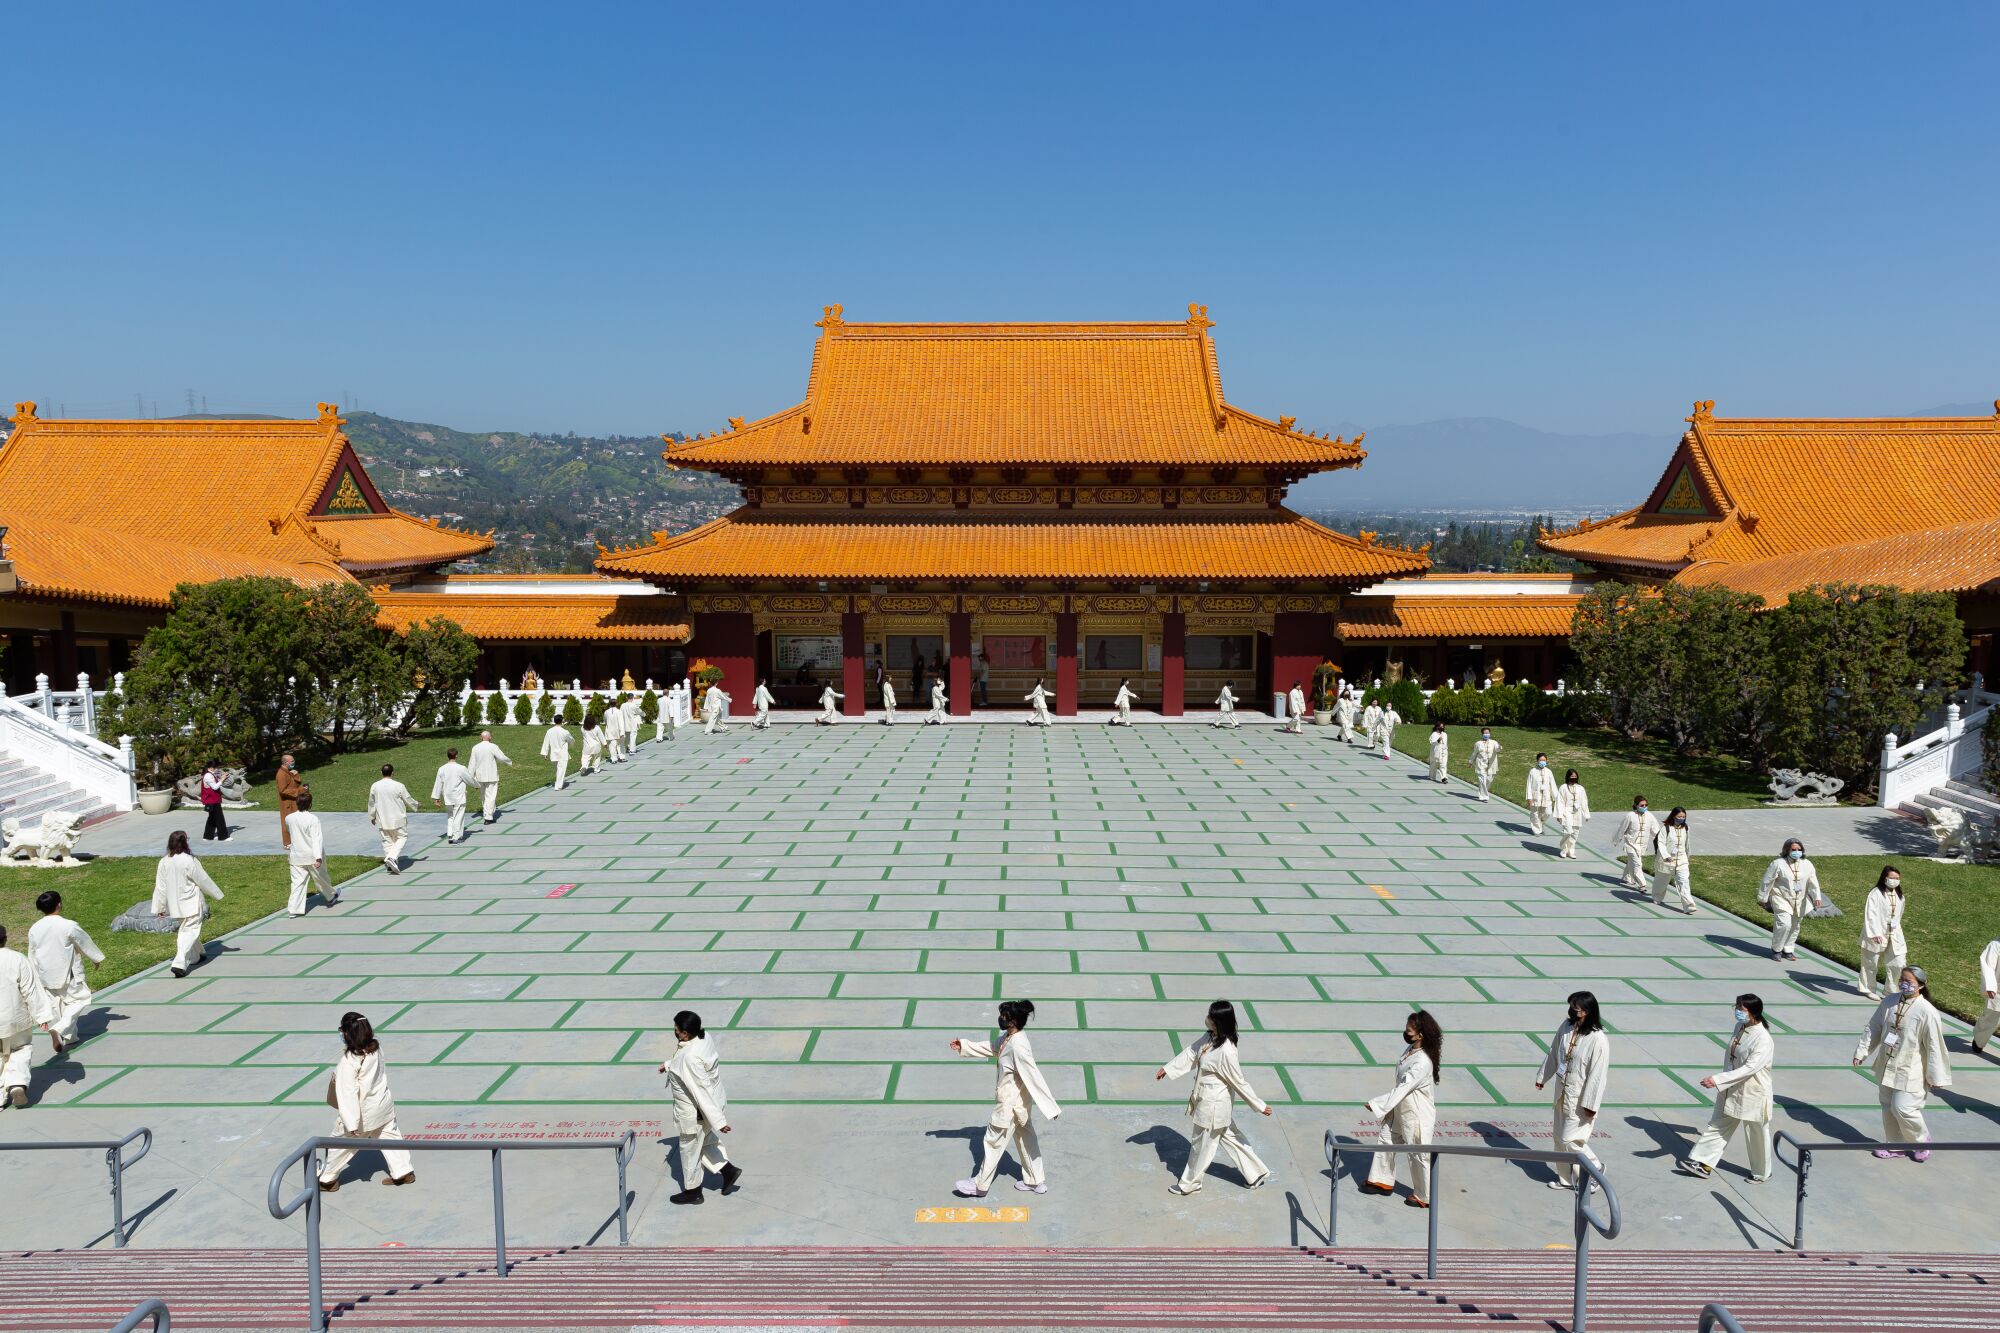 An overhead photo of a temple courtyard with people in white uniforms walking in a square formation